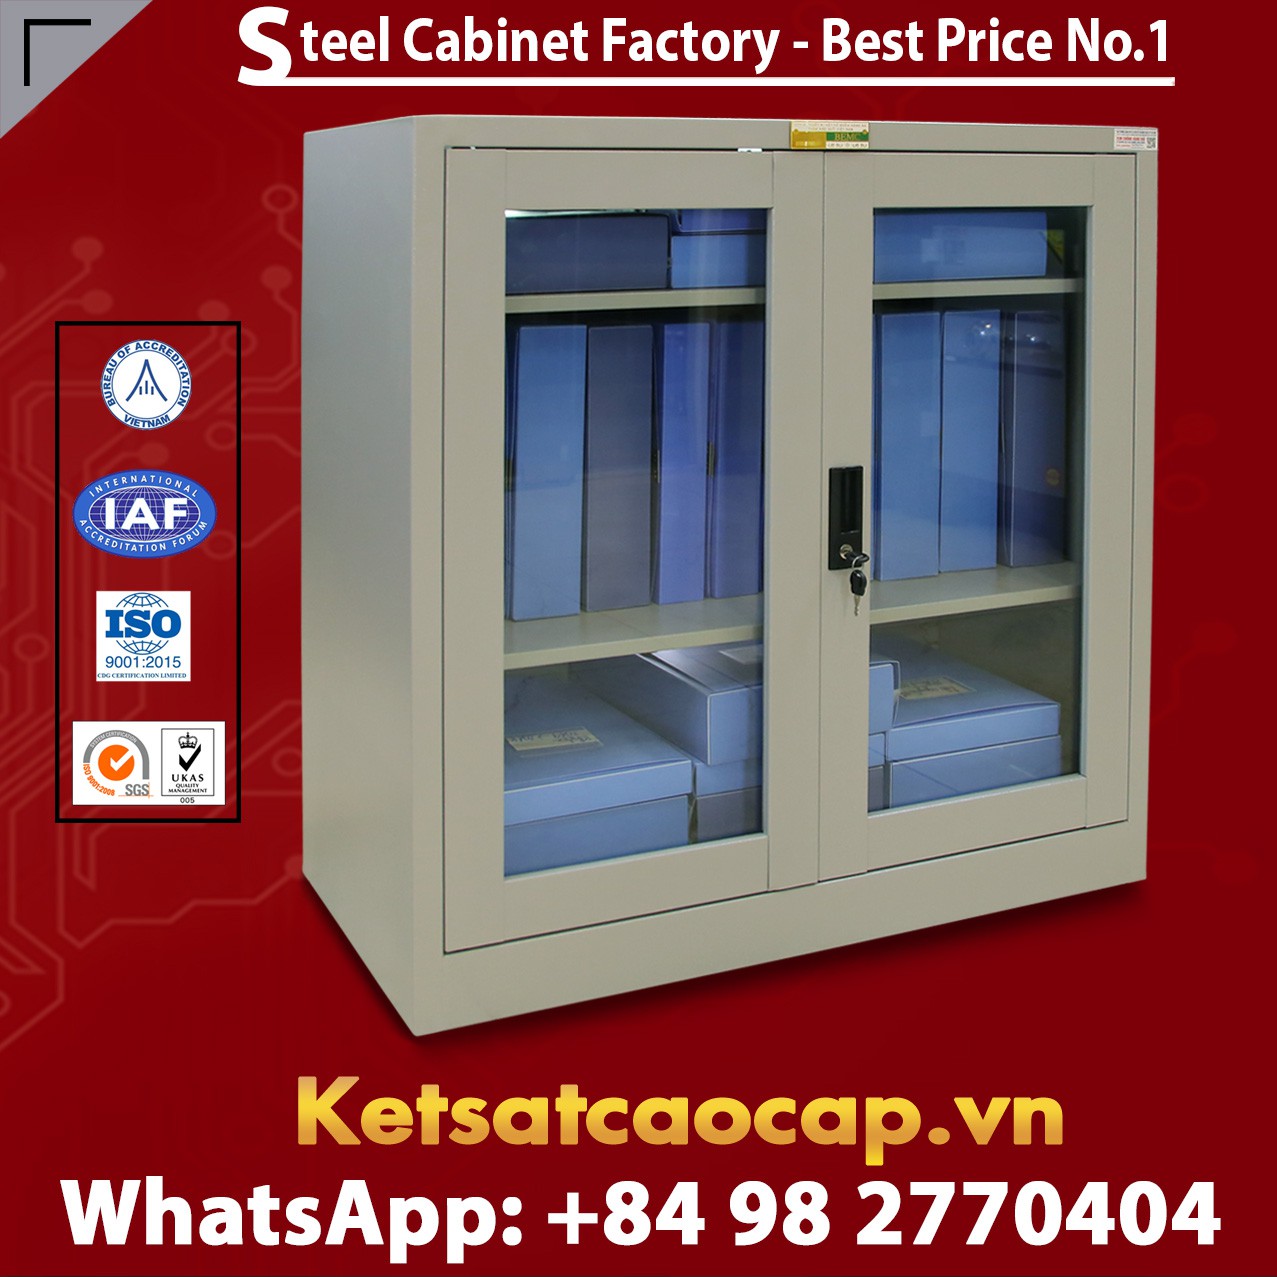 Fire Resistant Cabinets